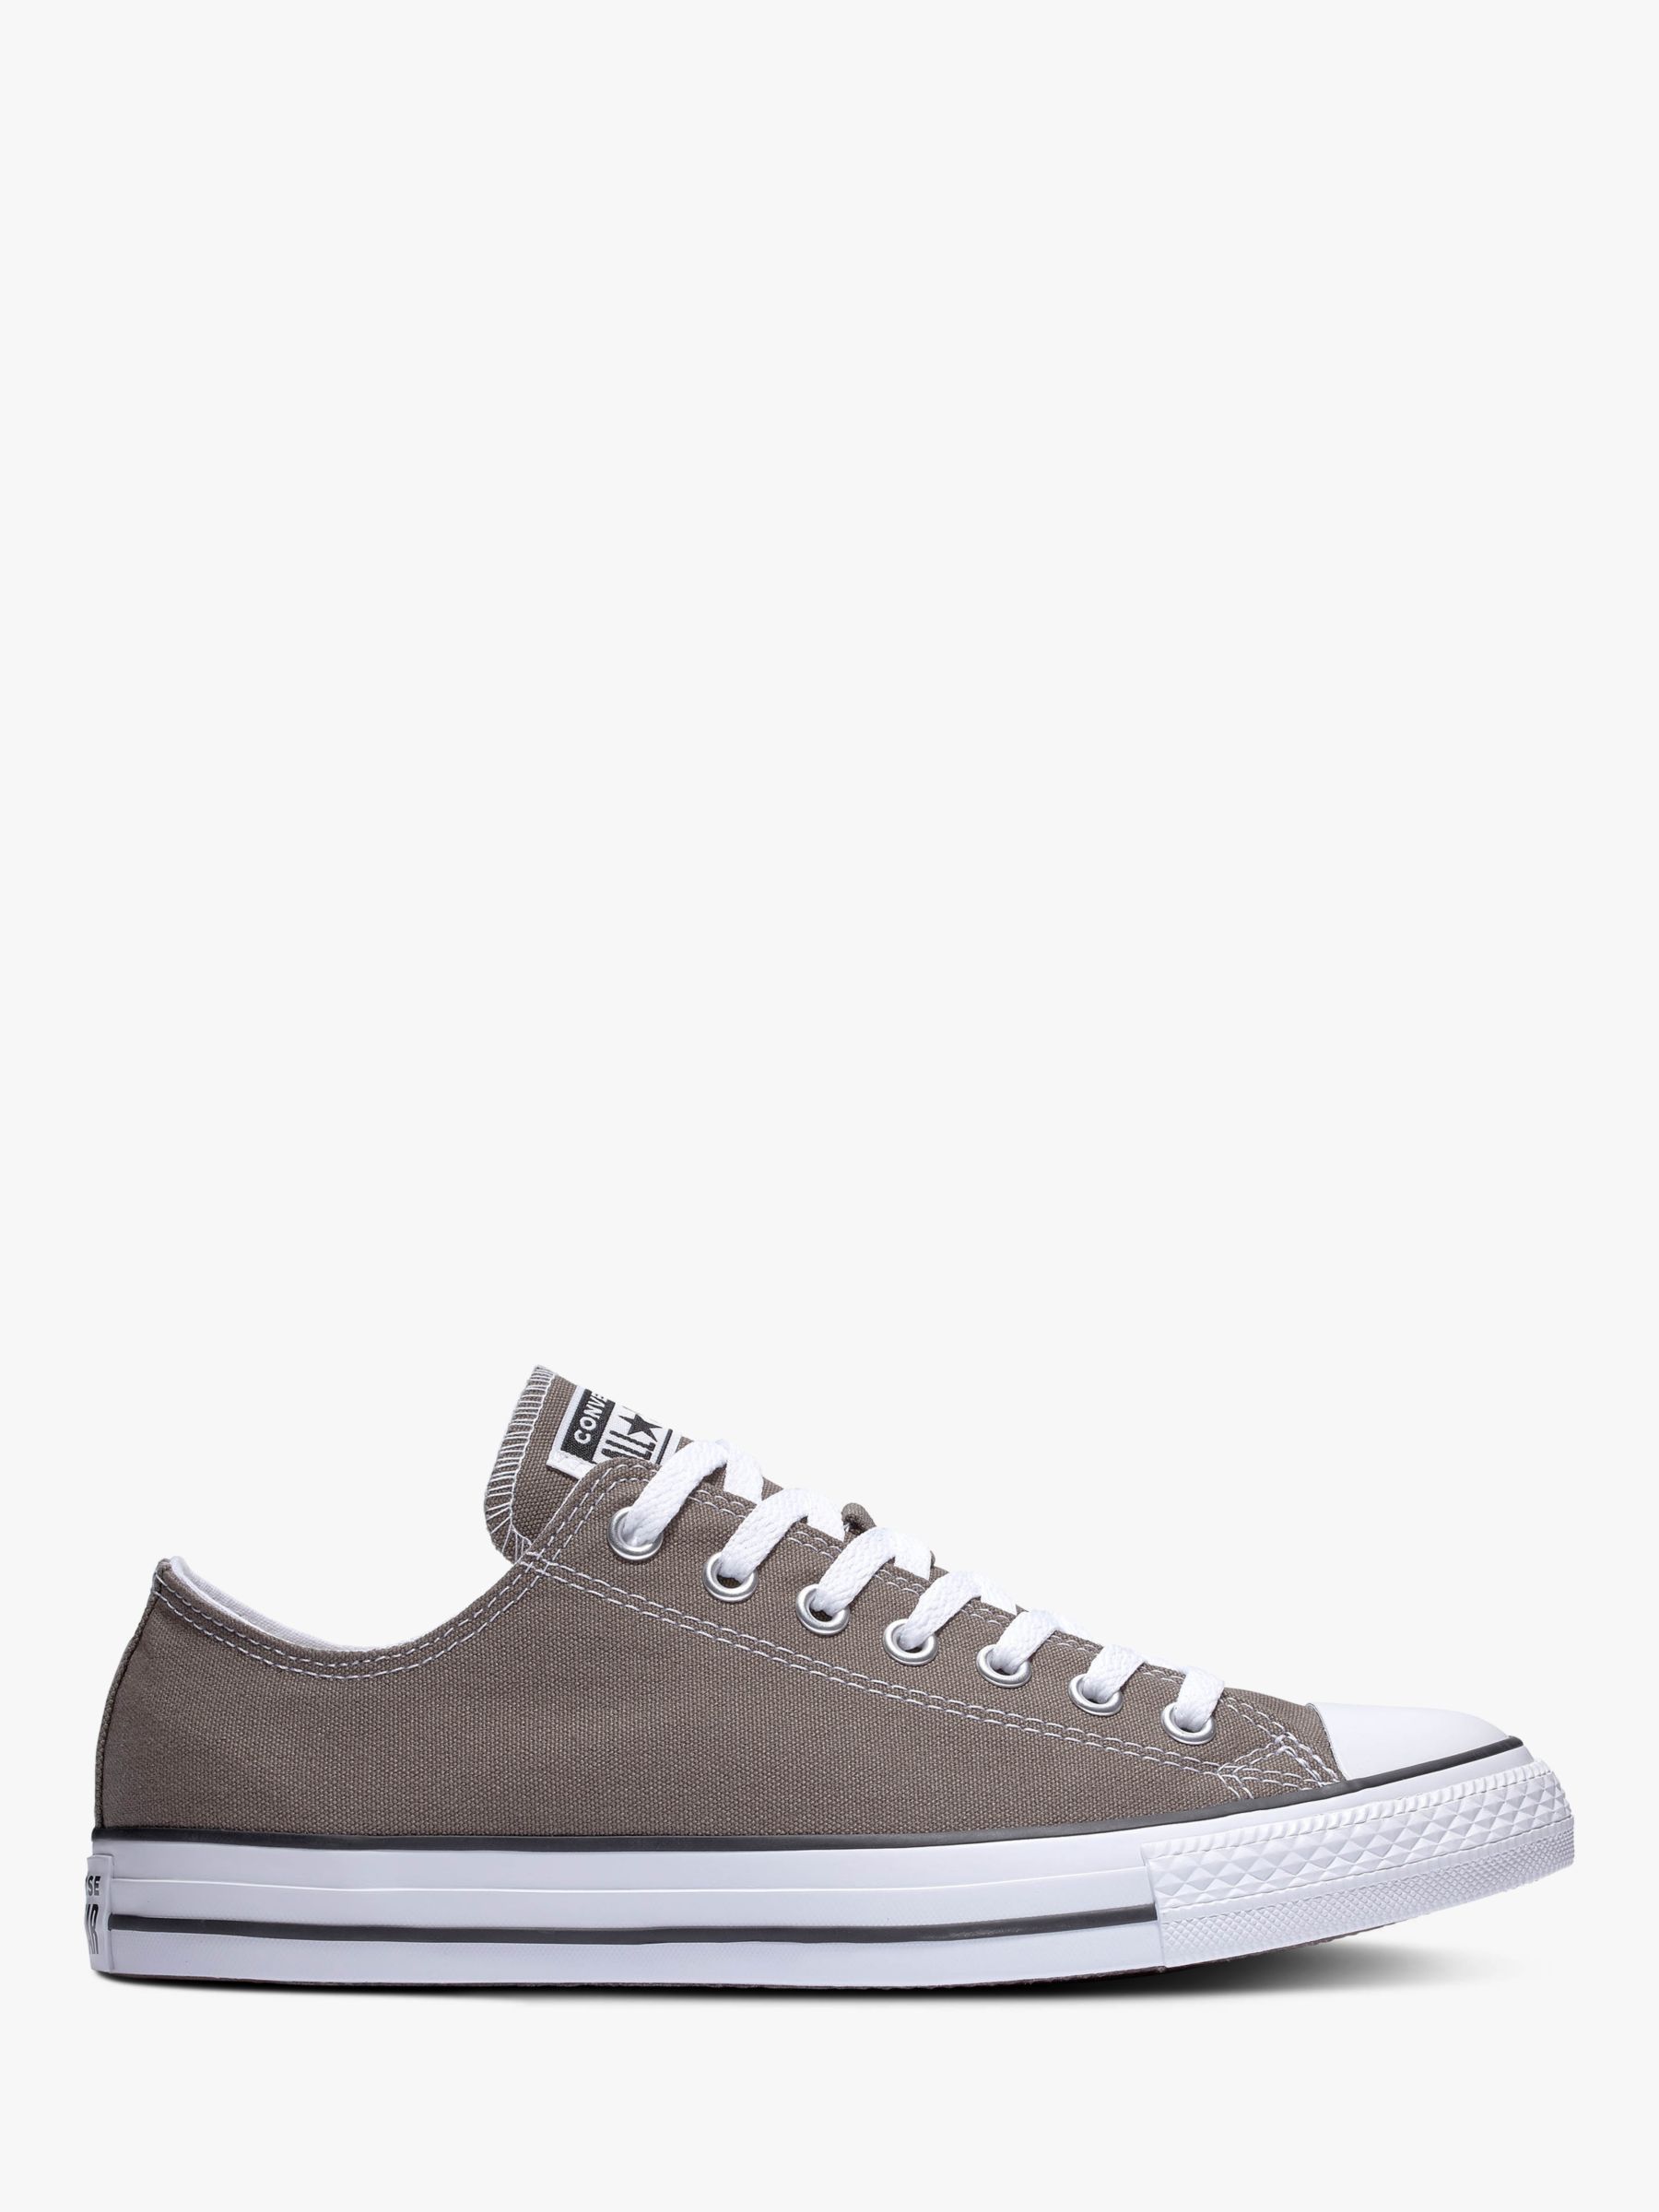 Converse Chuck Taylor All Star Canvas Ox Low-Top Trainers